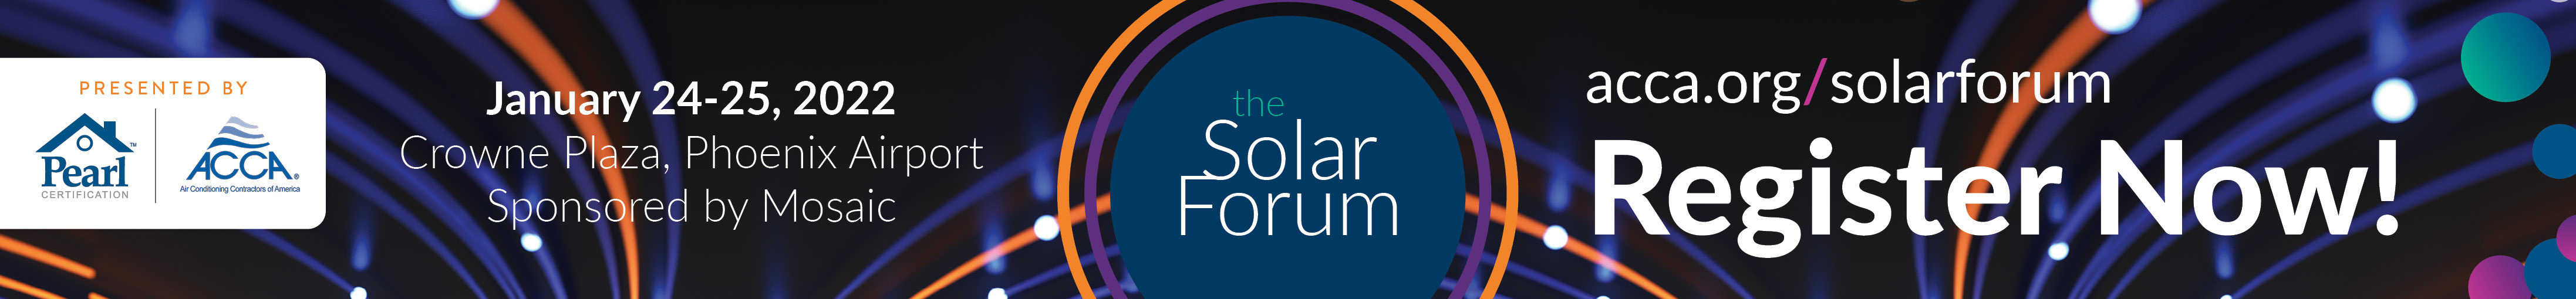 Solar Forum ACCA Email Graphics 2106x245 1